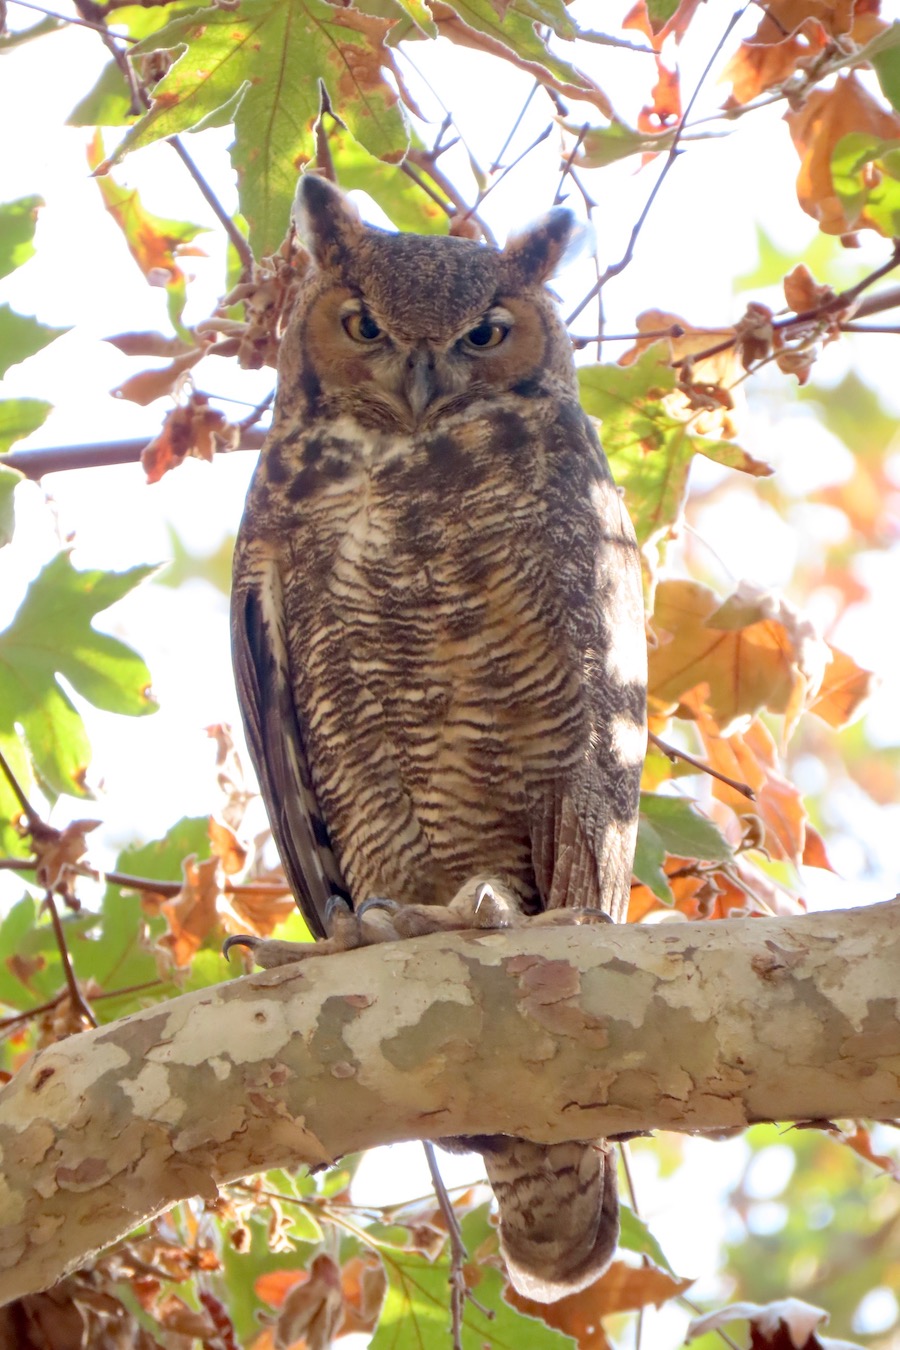 Great Horned Owl, Lower Arroyo Seco. Photo by Max Brenner